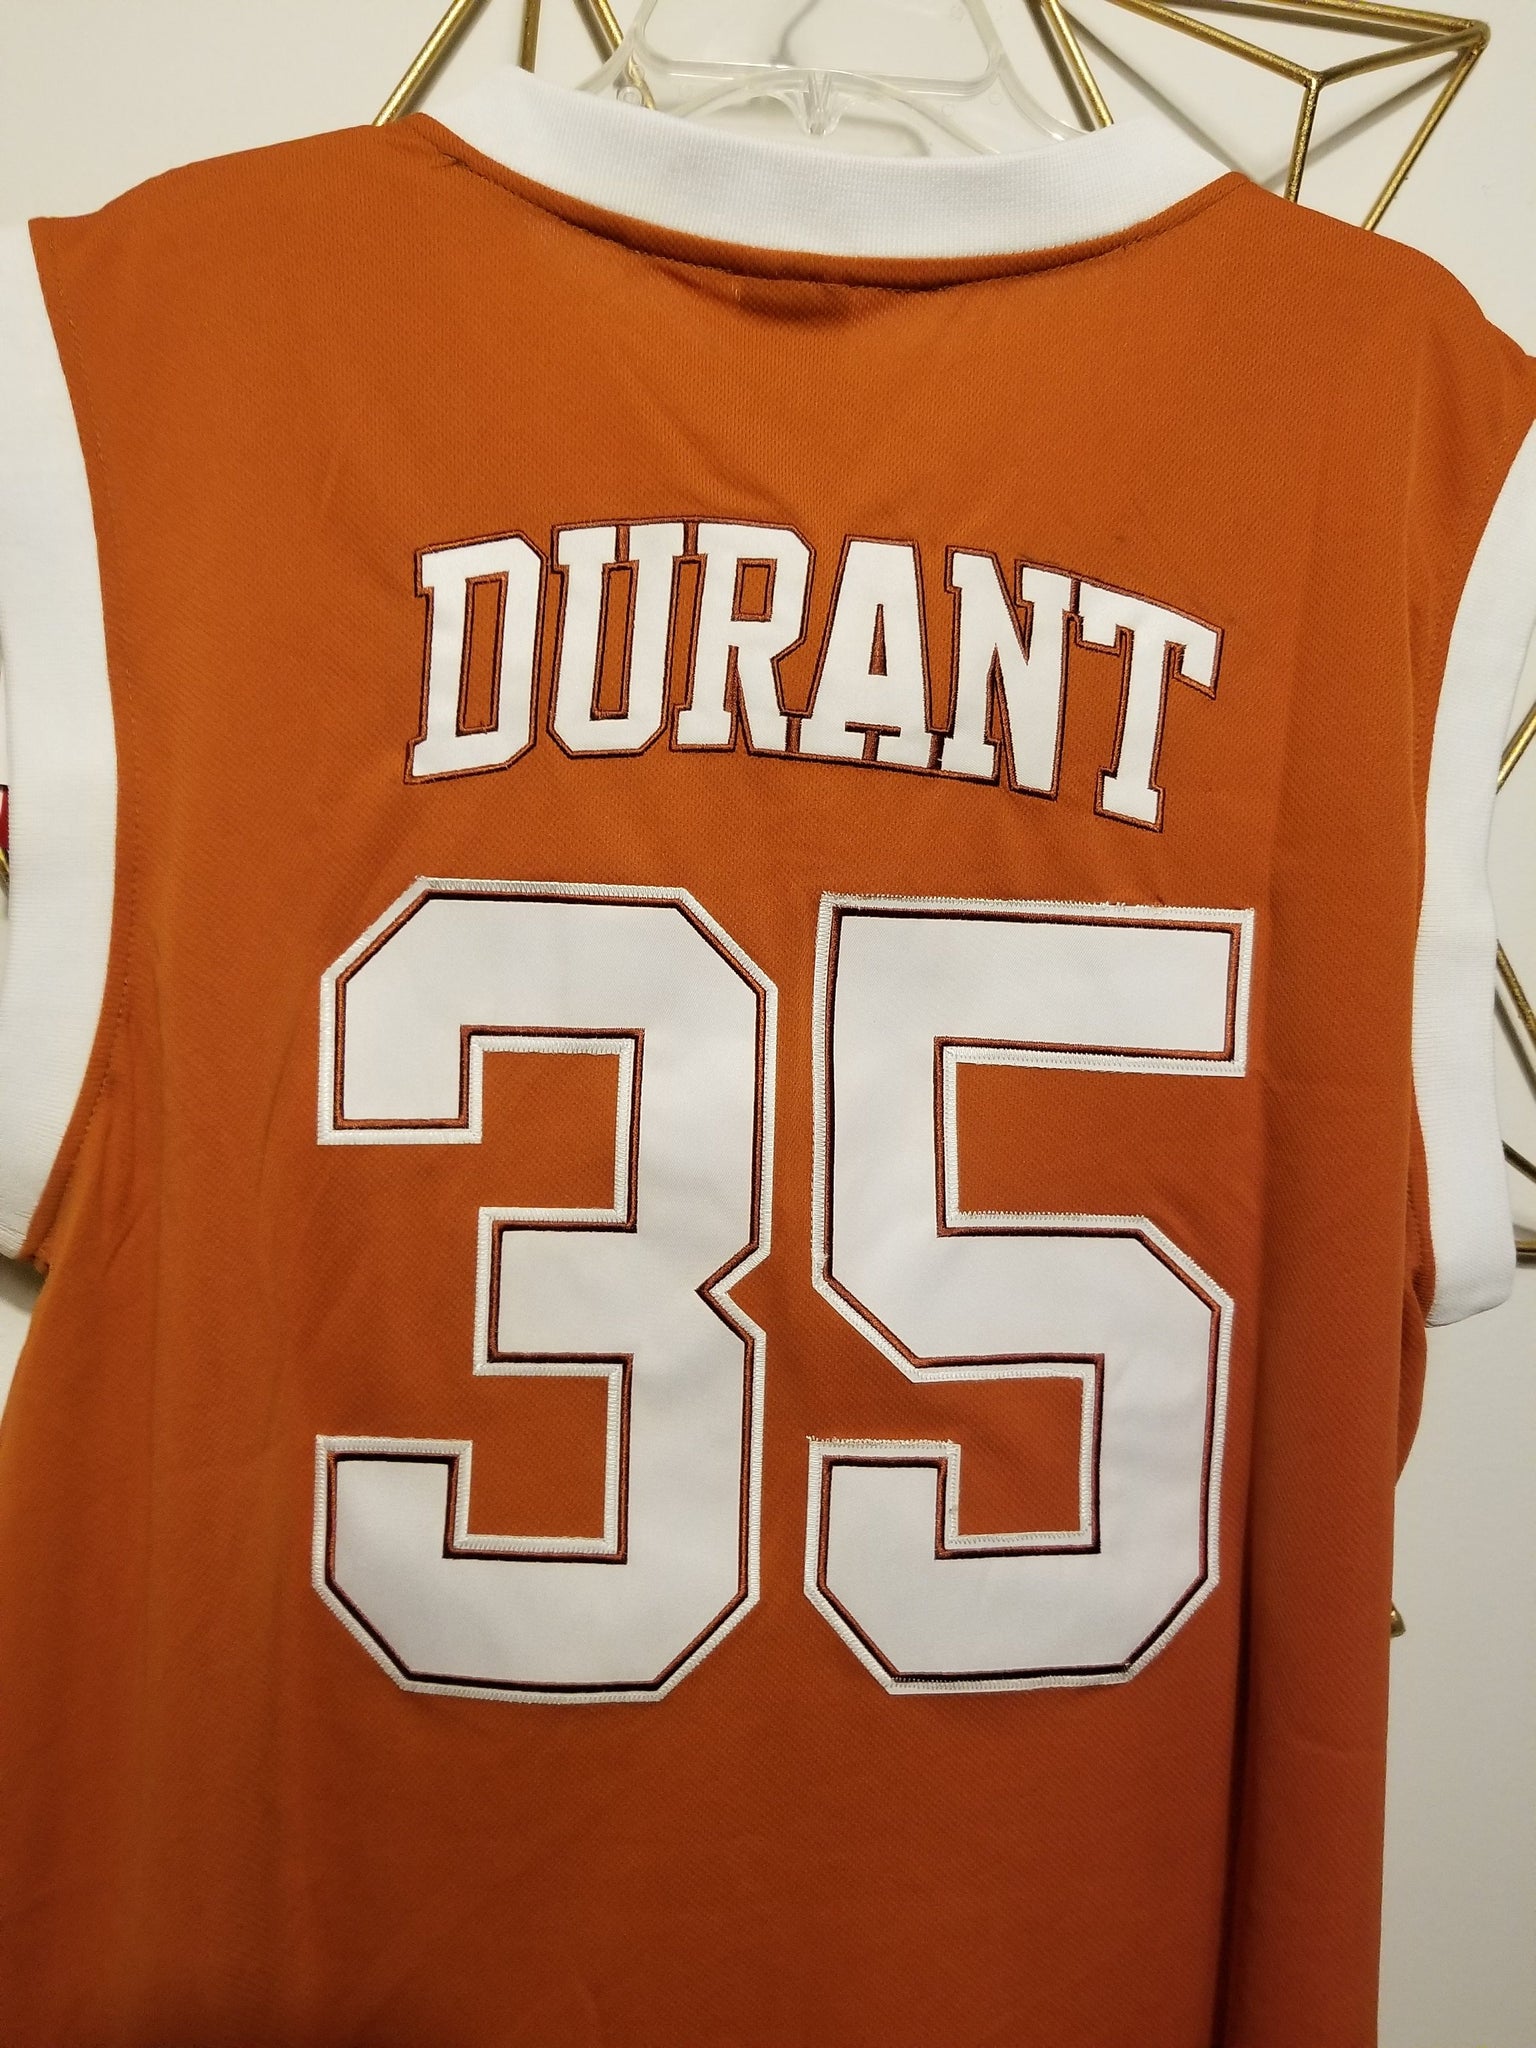 kevin durant college jersey for sale